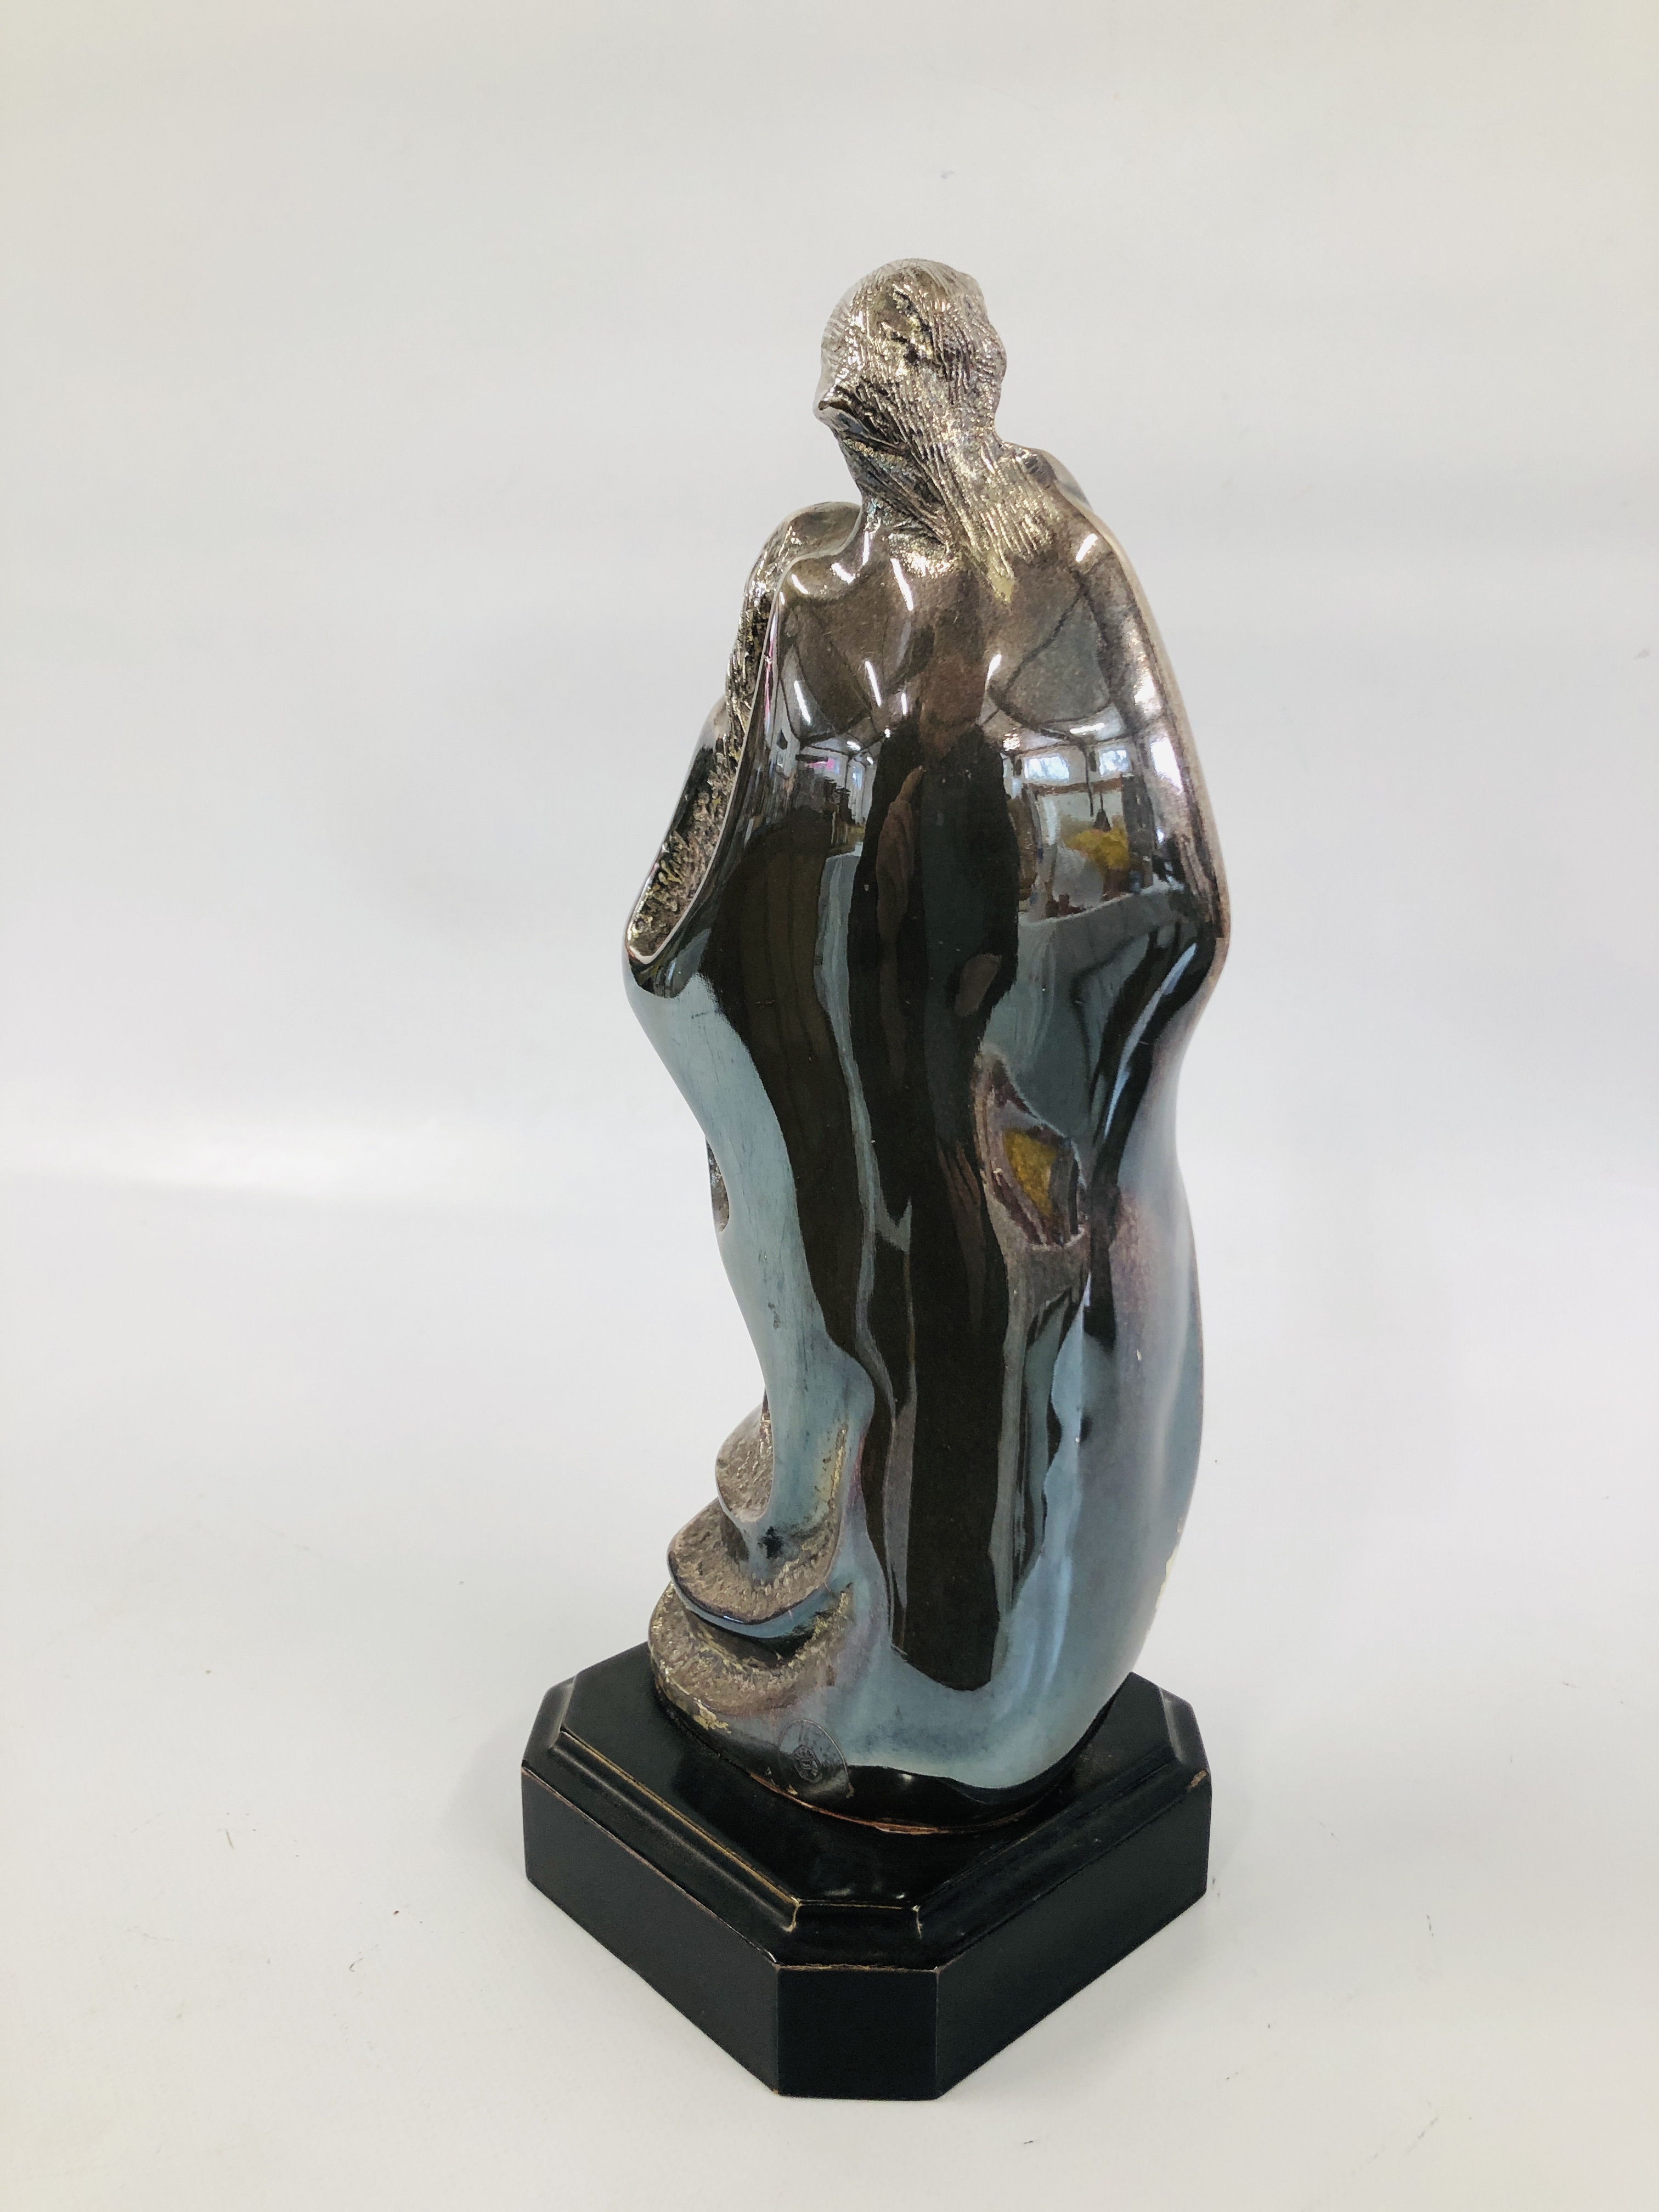 LIMITED EDITION ERMES OTTAVIANI RELIGIOUS SCULPTURE BEARING SIGNATURE, H 32.5CM. - Image 7 of 9